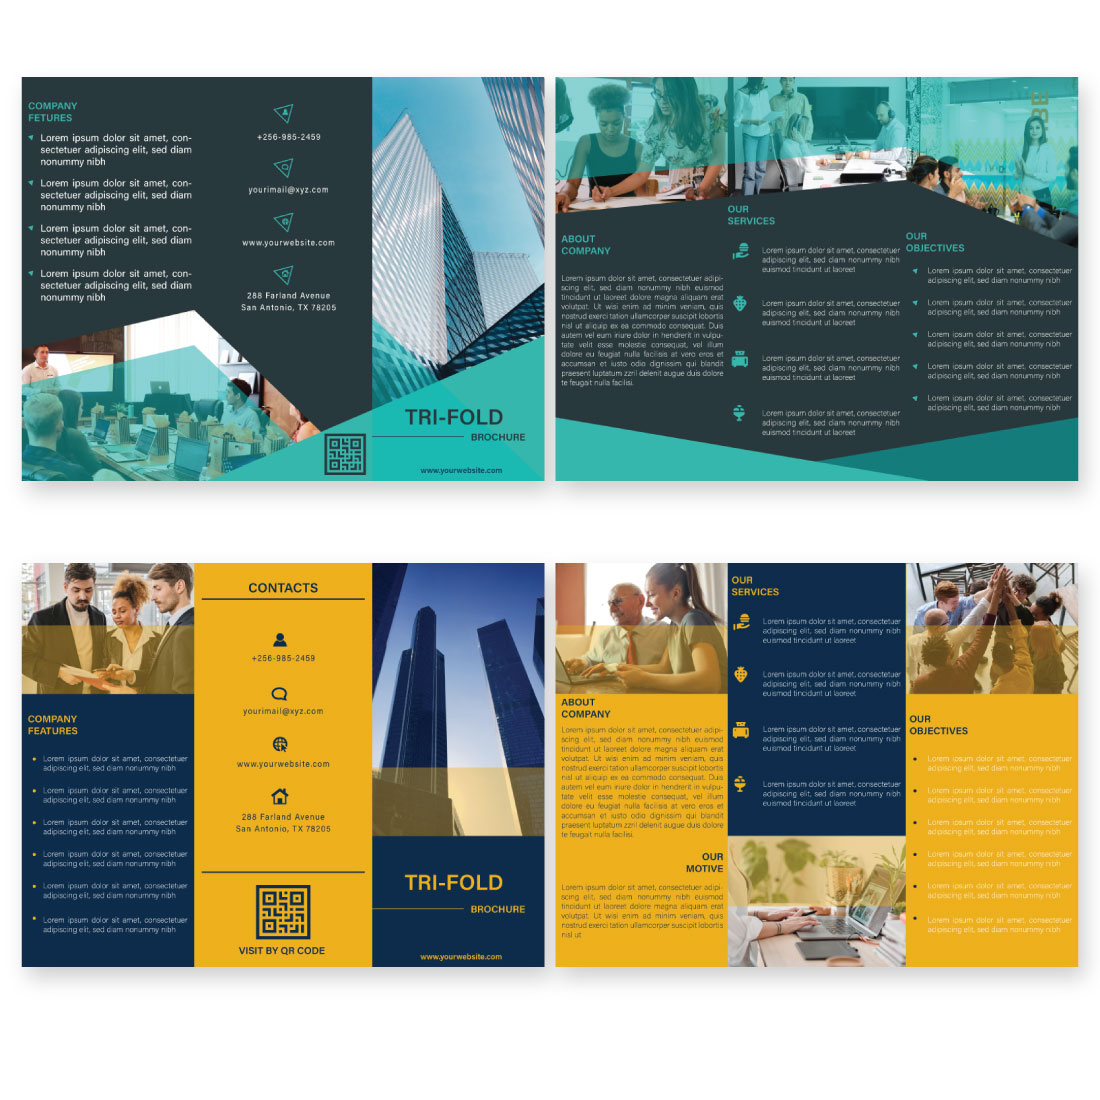 Collection of images of amazing brochure templates